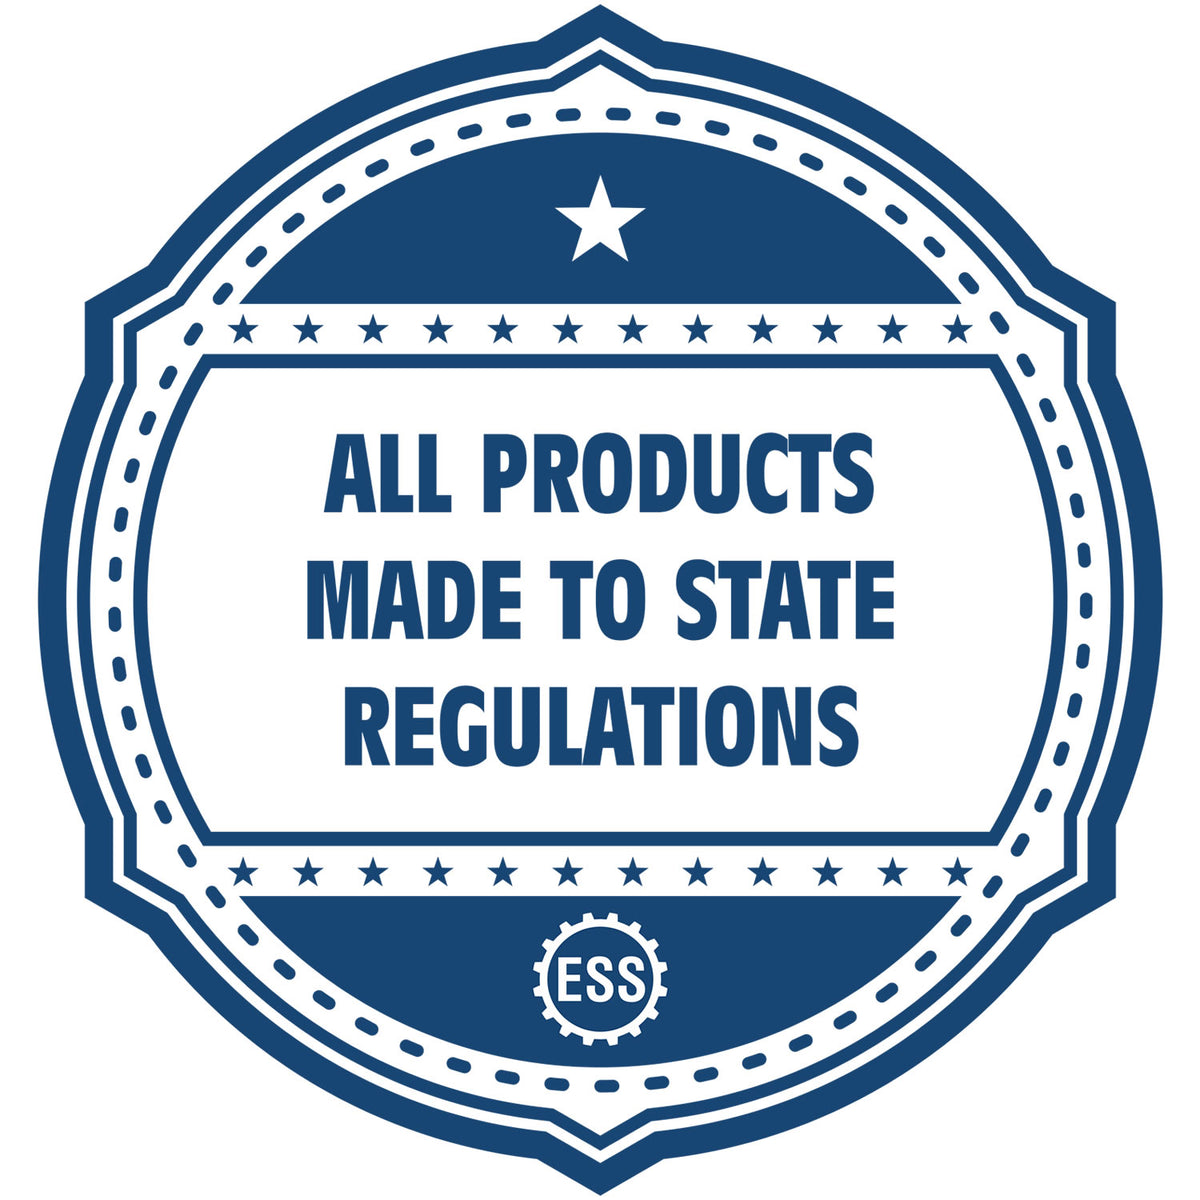 An icon or badge element for the Digital Pennsylvania PE Stamp and Electronic Seal for Pennsylvania Engineer showing that this product is made in compliance with state regulations.